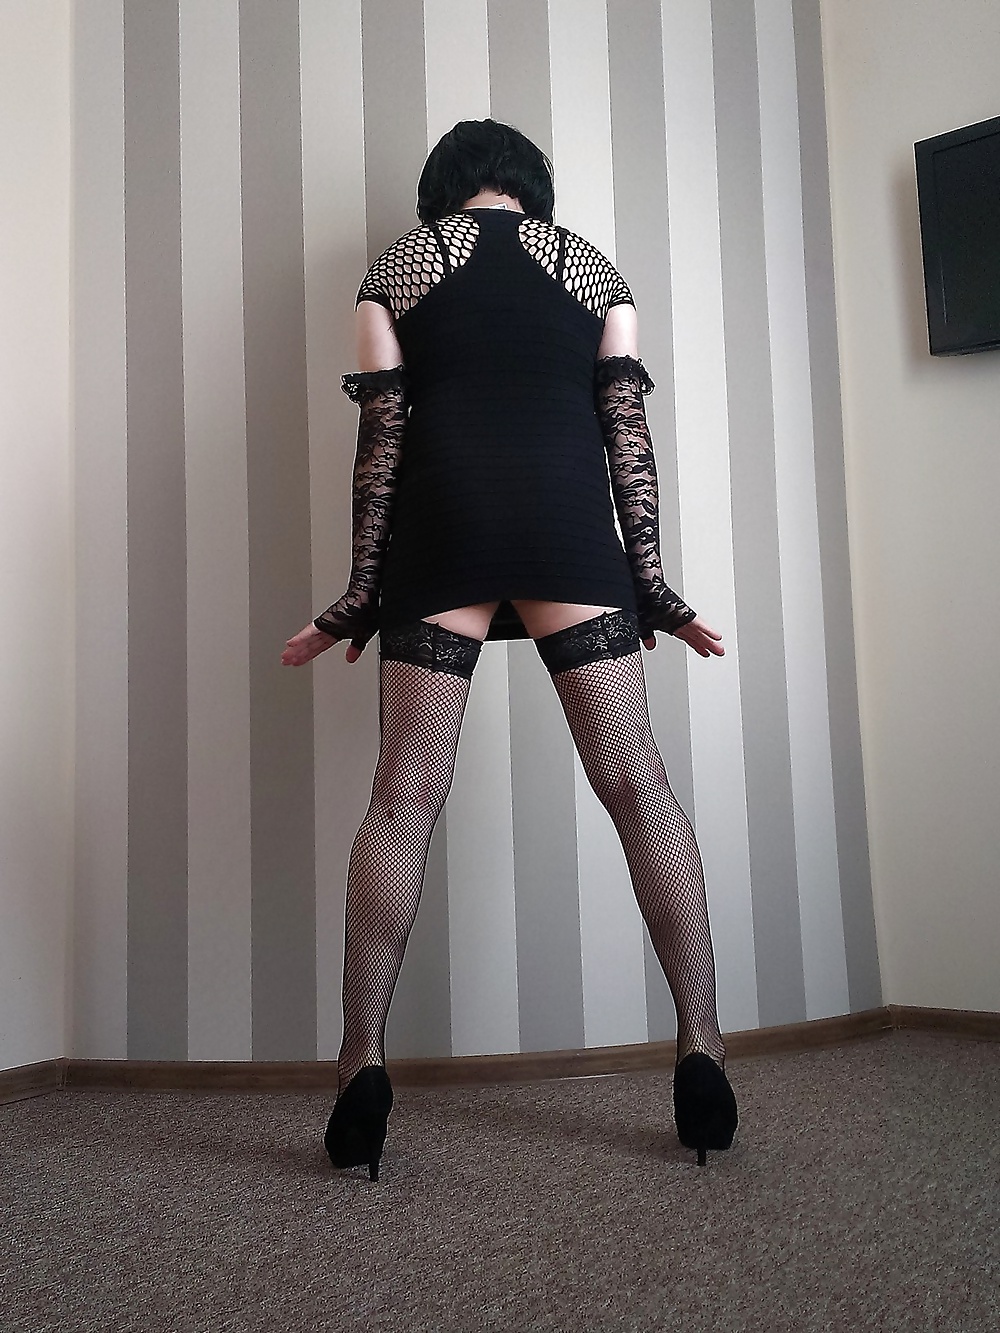 In a hotel room - black minidress, stockings and heels  #28504303